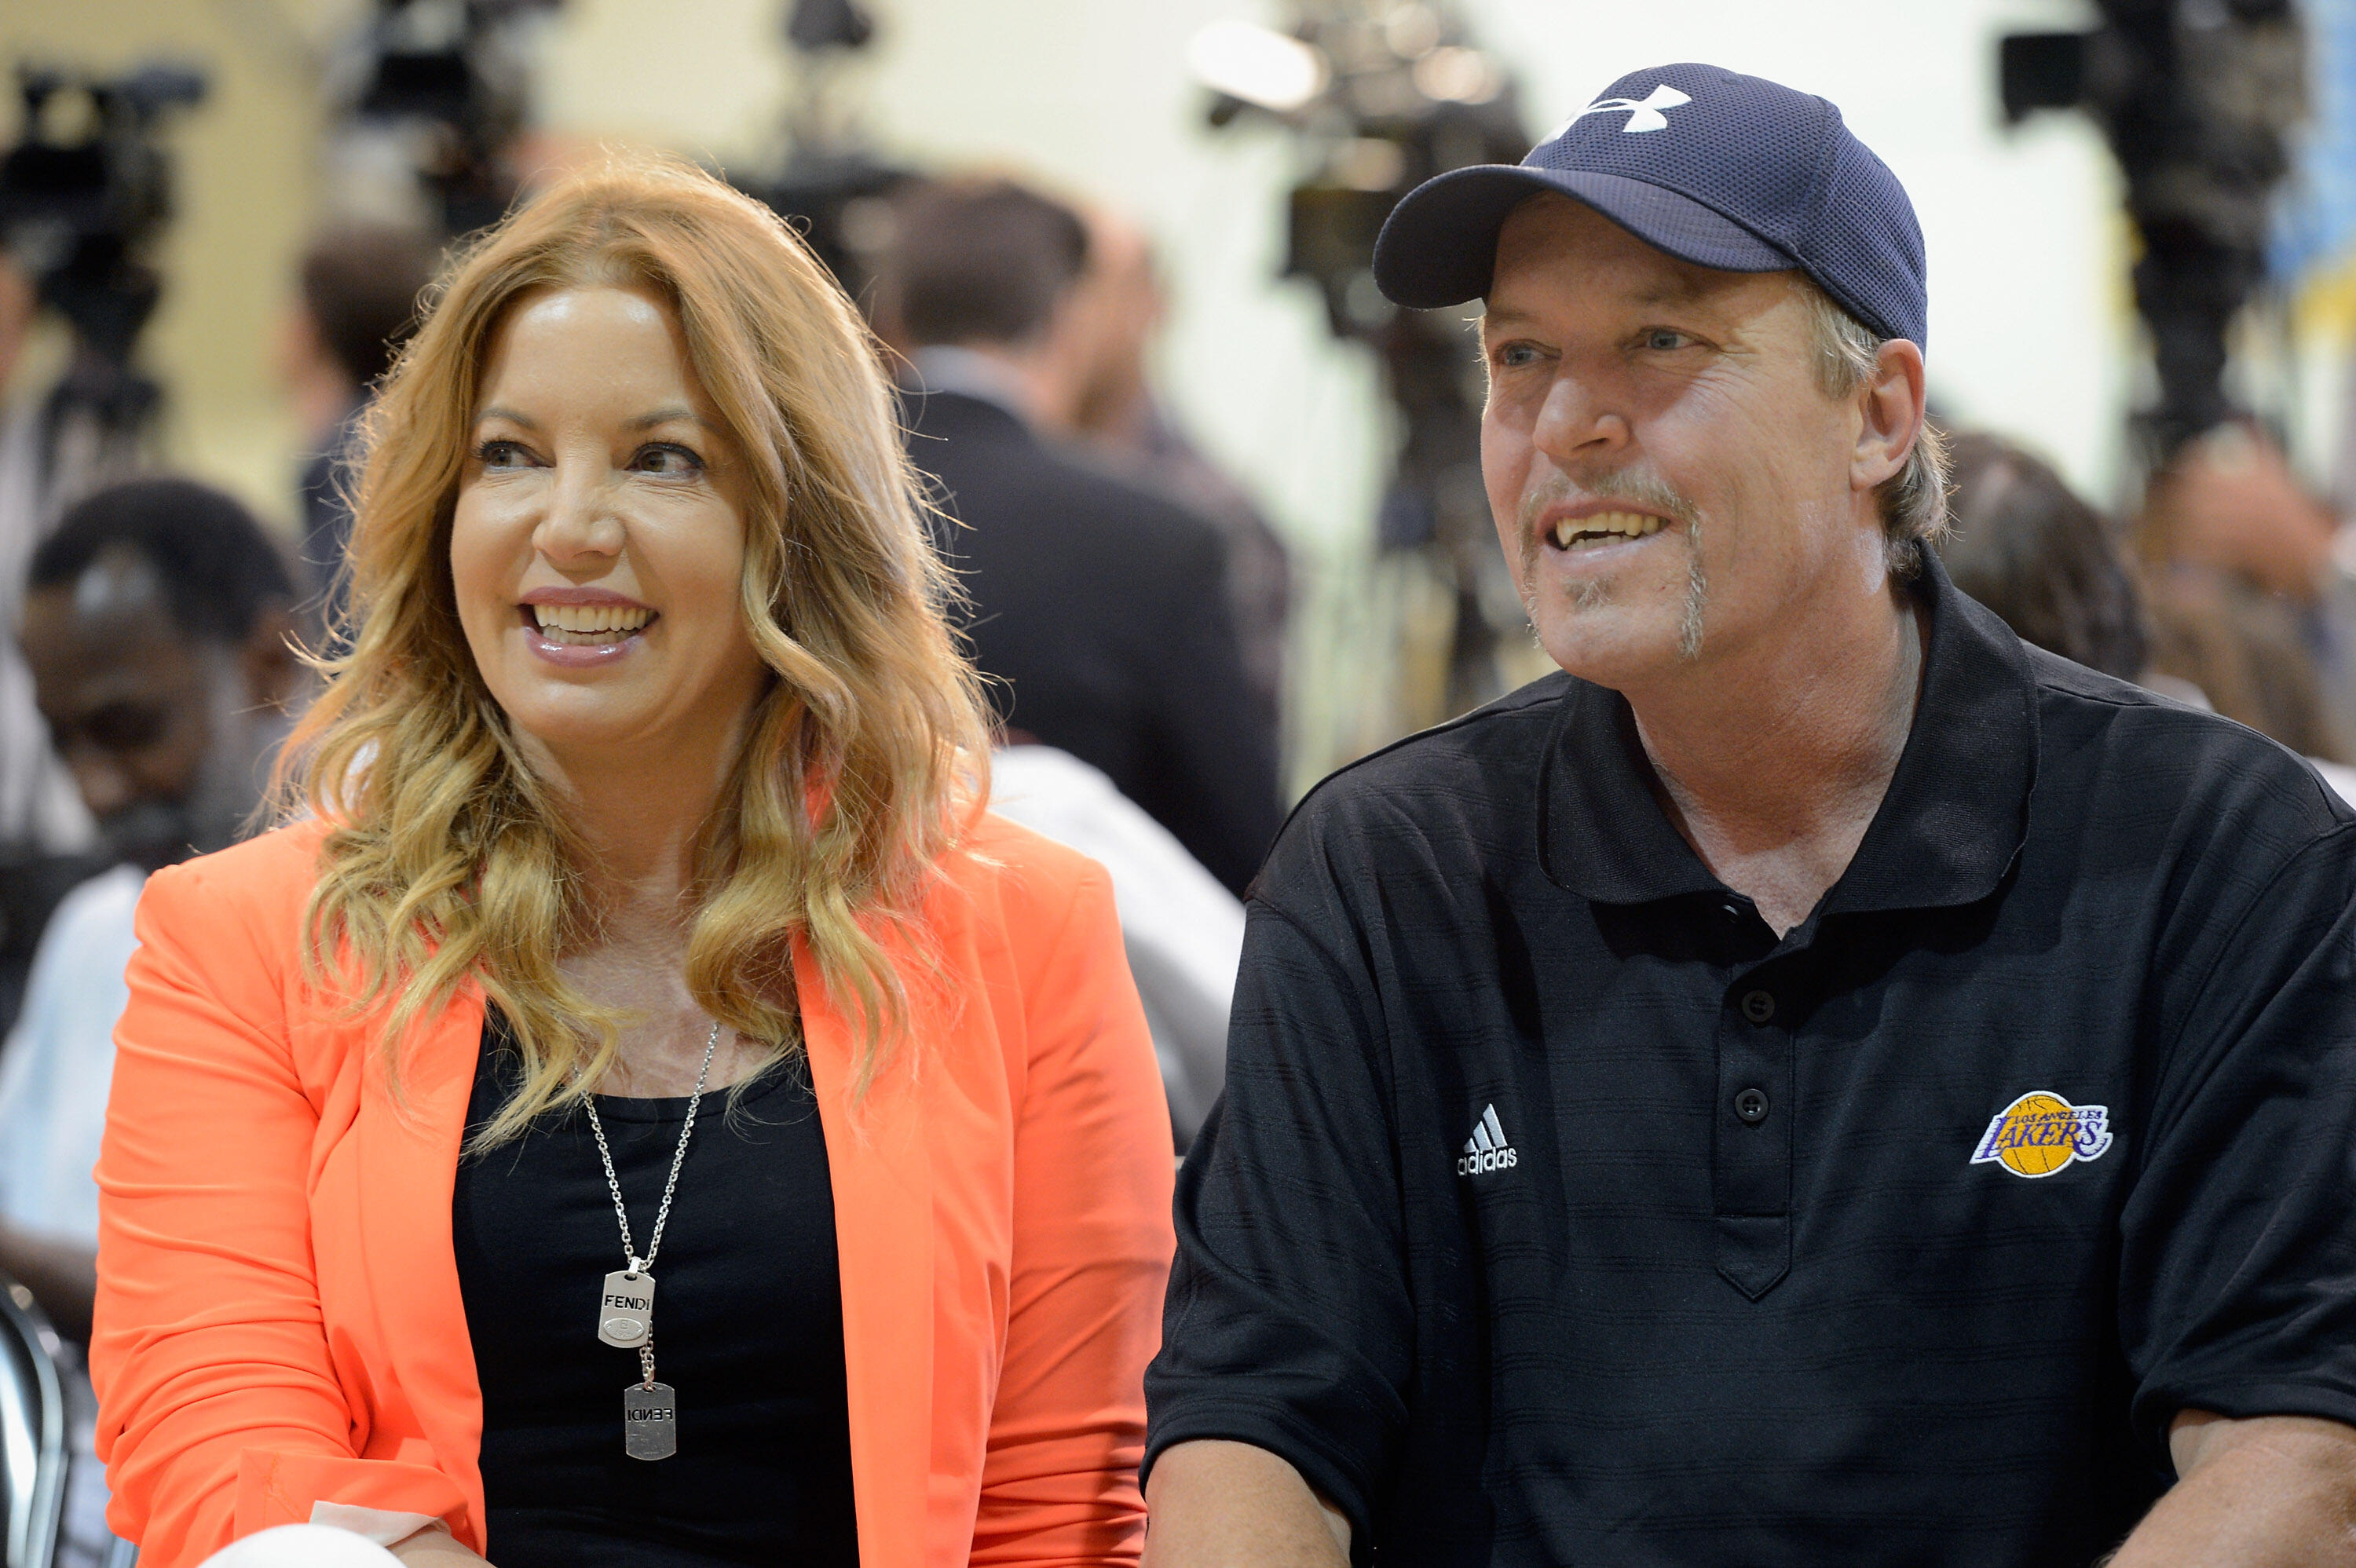 EL SEGUNDO, CA - AUGUST 10:  Jim Buss and his sister Jeanie Buss of the Los Angeles lakers attend a news conference where Dwight Howard was introduced as the newest member of the team at the Toyota Sports Center on August 10, 2012 in El Segundo, Californi